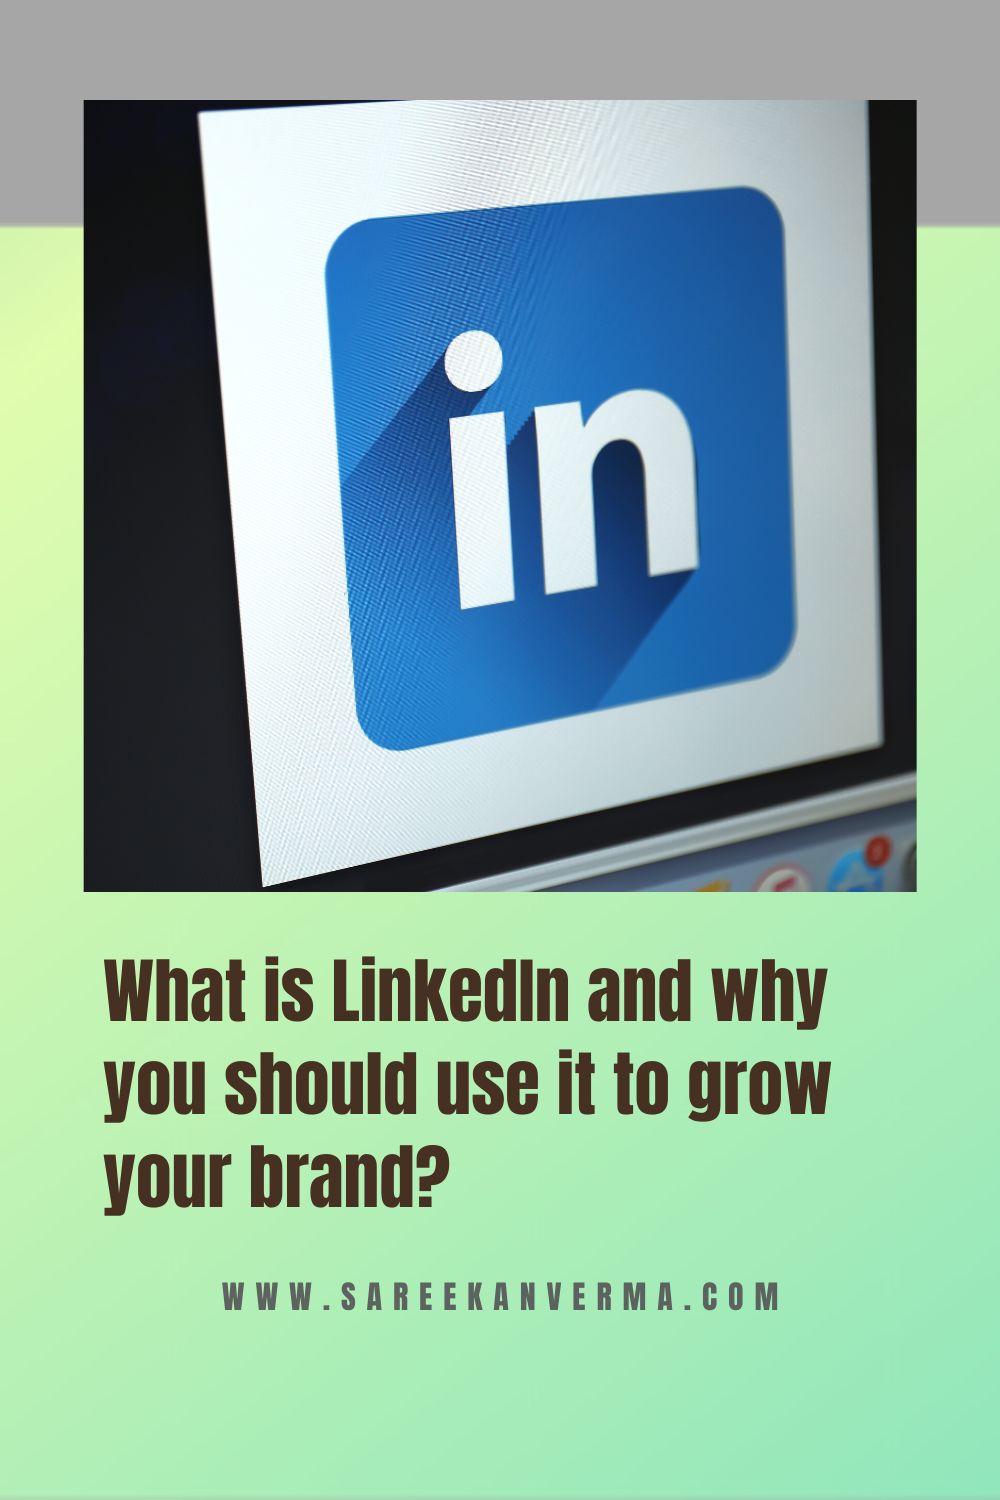 What is LinkedIn and why you should use it to grow your brand?